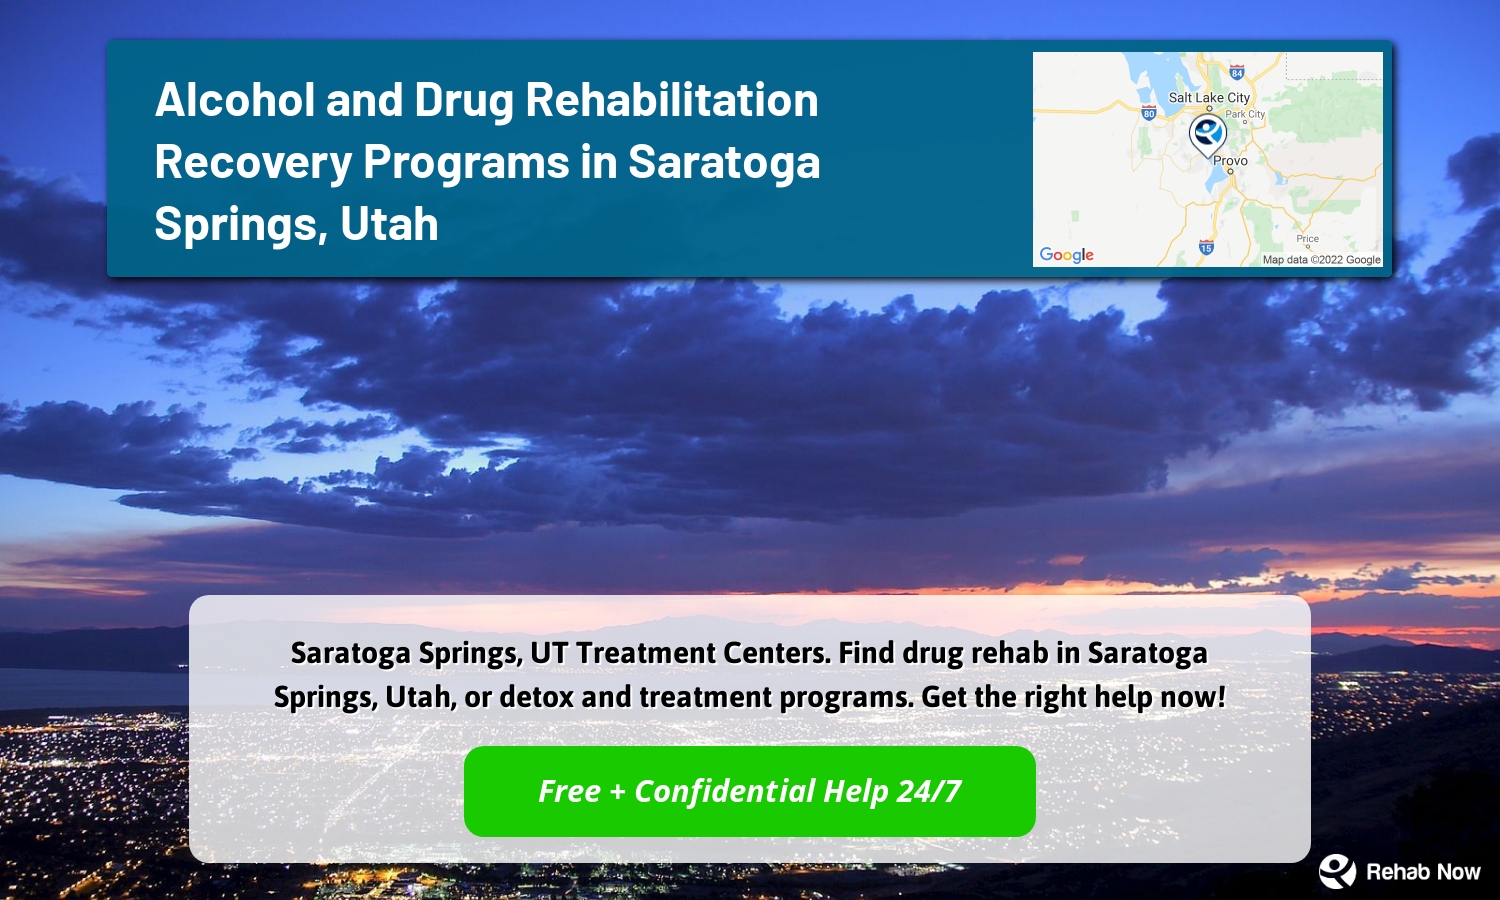 Saratoga Springs, UT Treatment Centers. Find drug rehab in Saratoga Springs, Utah, or detox and treatment programs. Get the right help now!